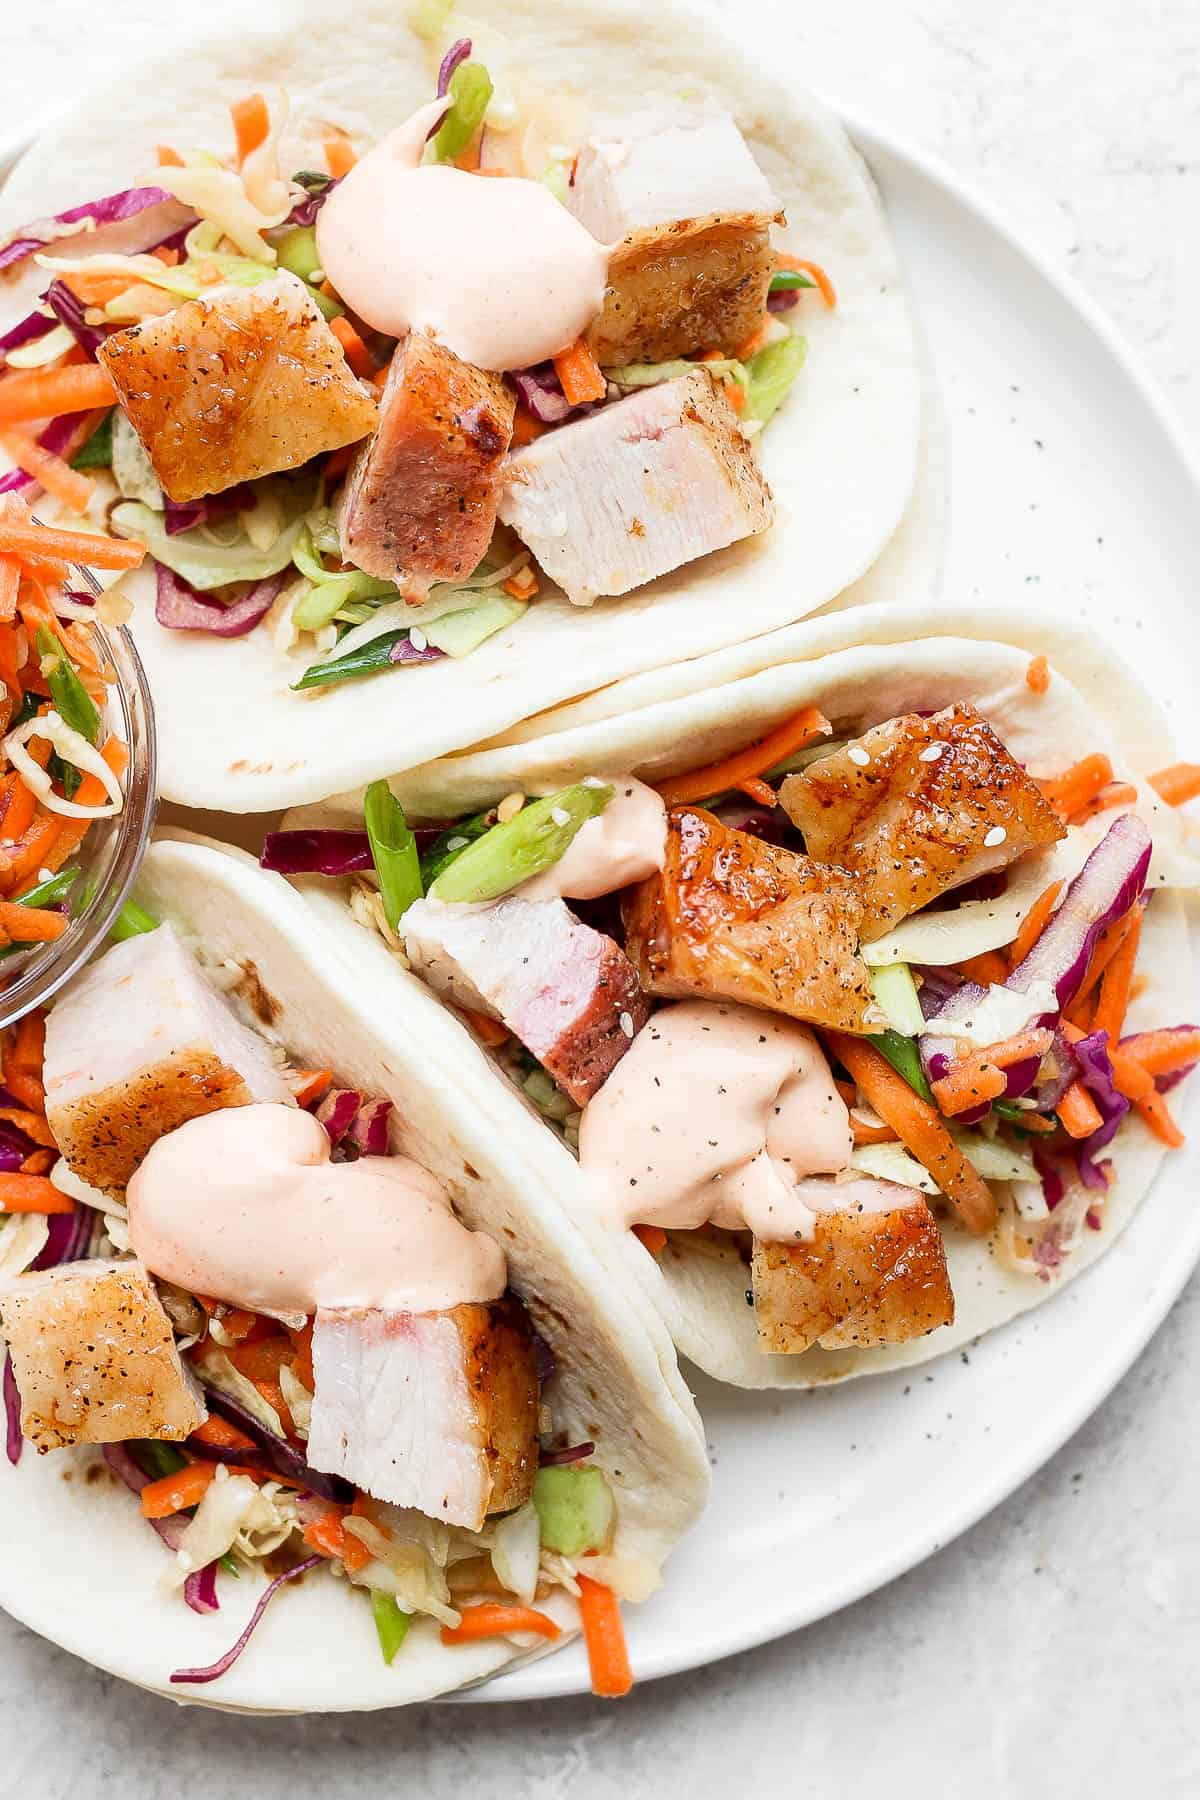 Pork belly tacos on a white plate.